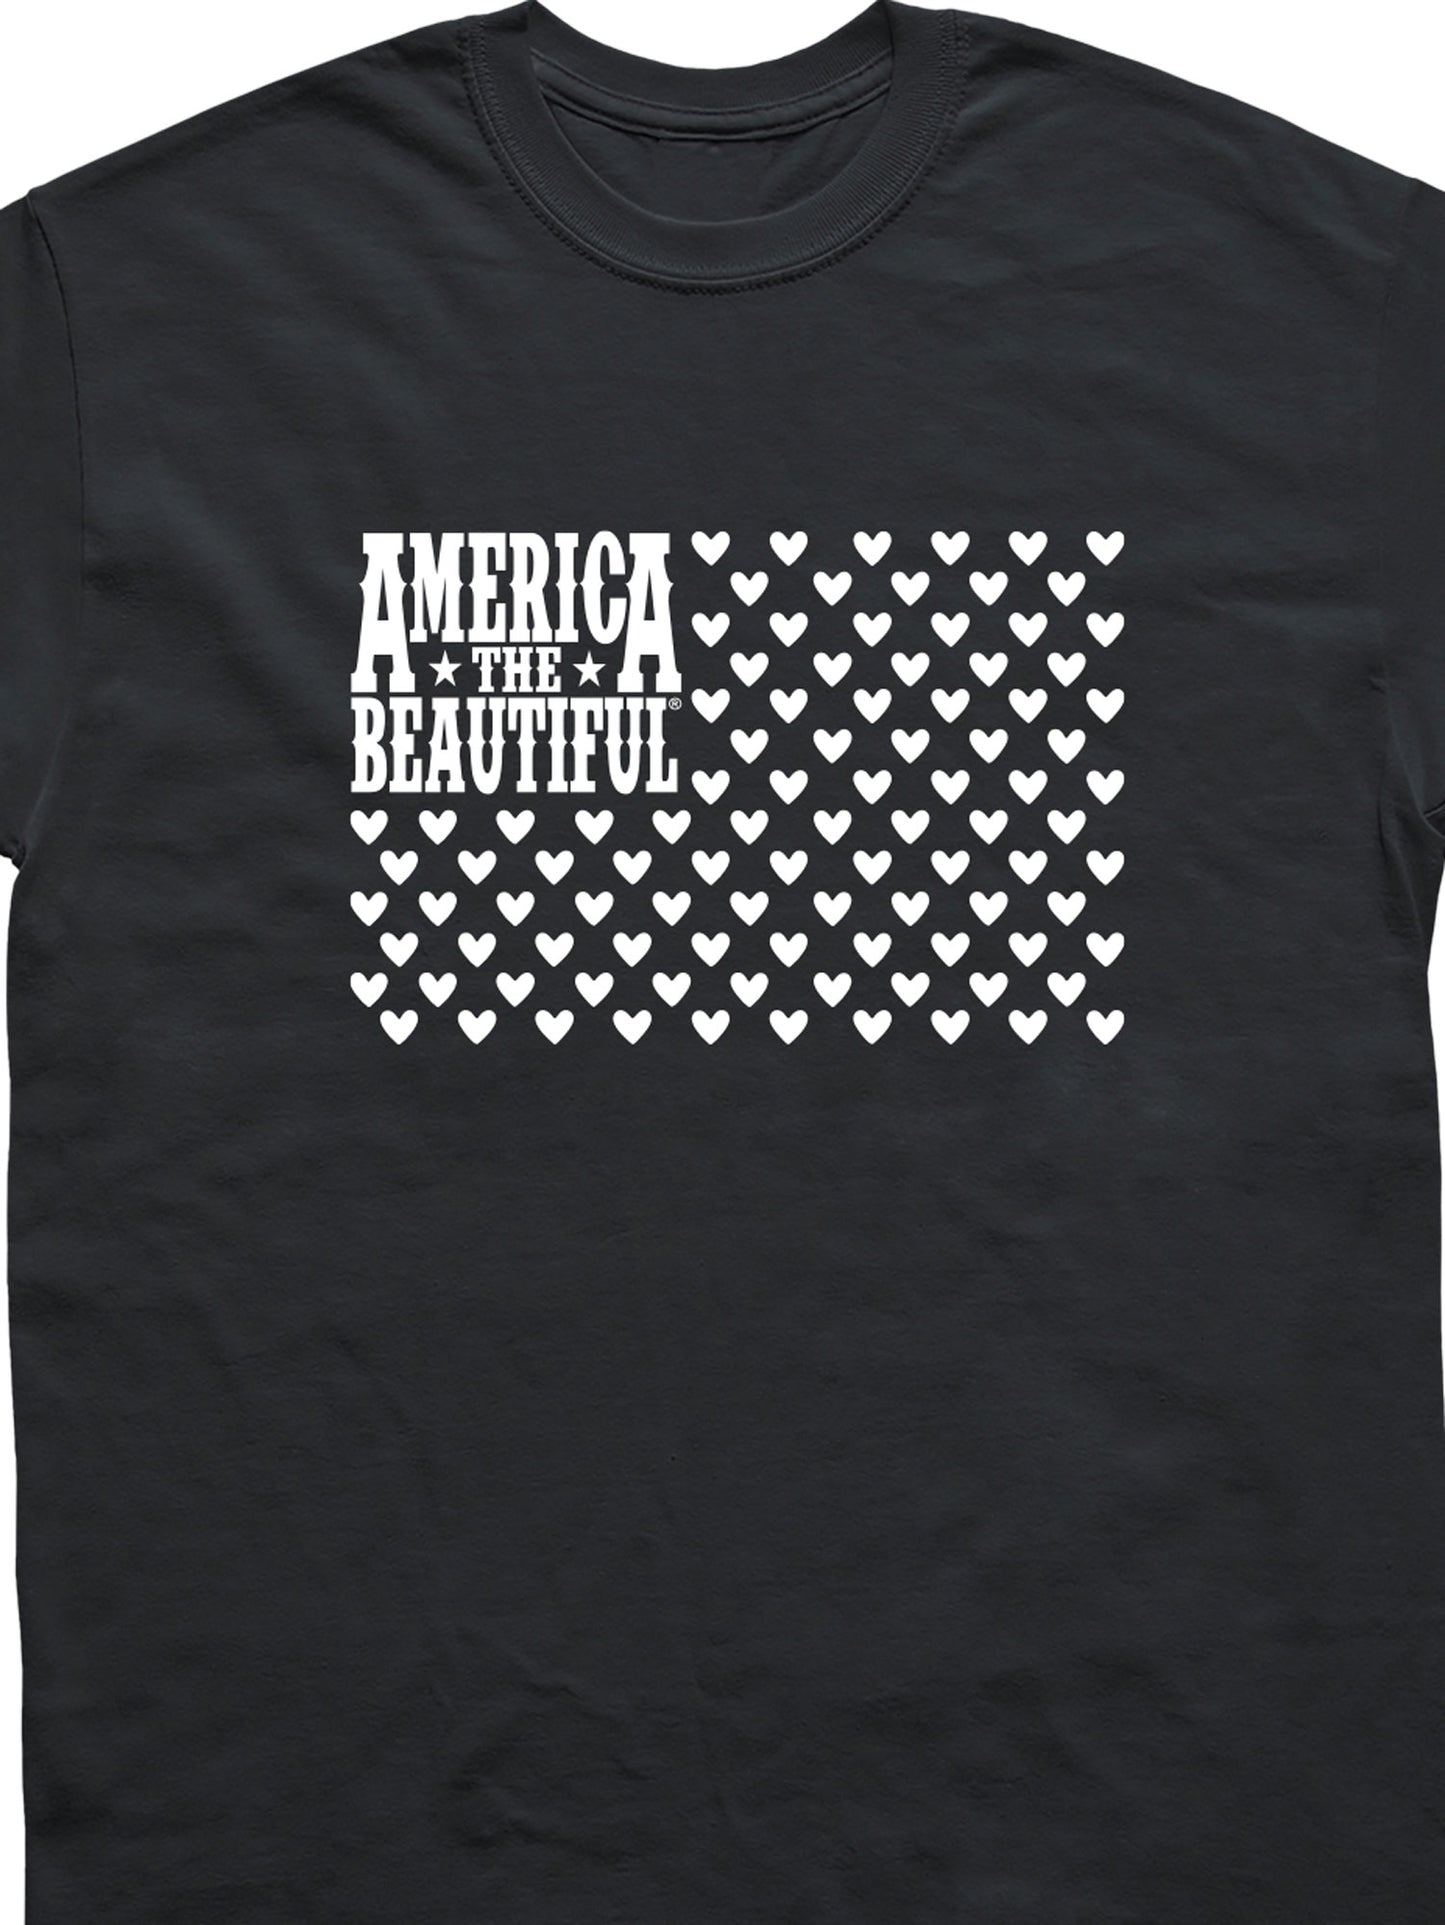 Black t-shirt with American flag formed of white hearts and “America The Beautiful” with two stars in the field.